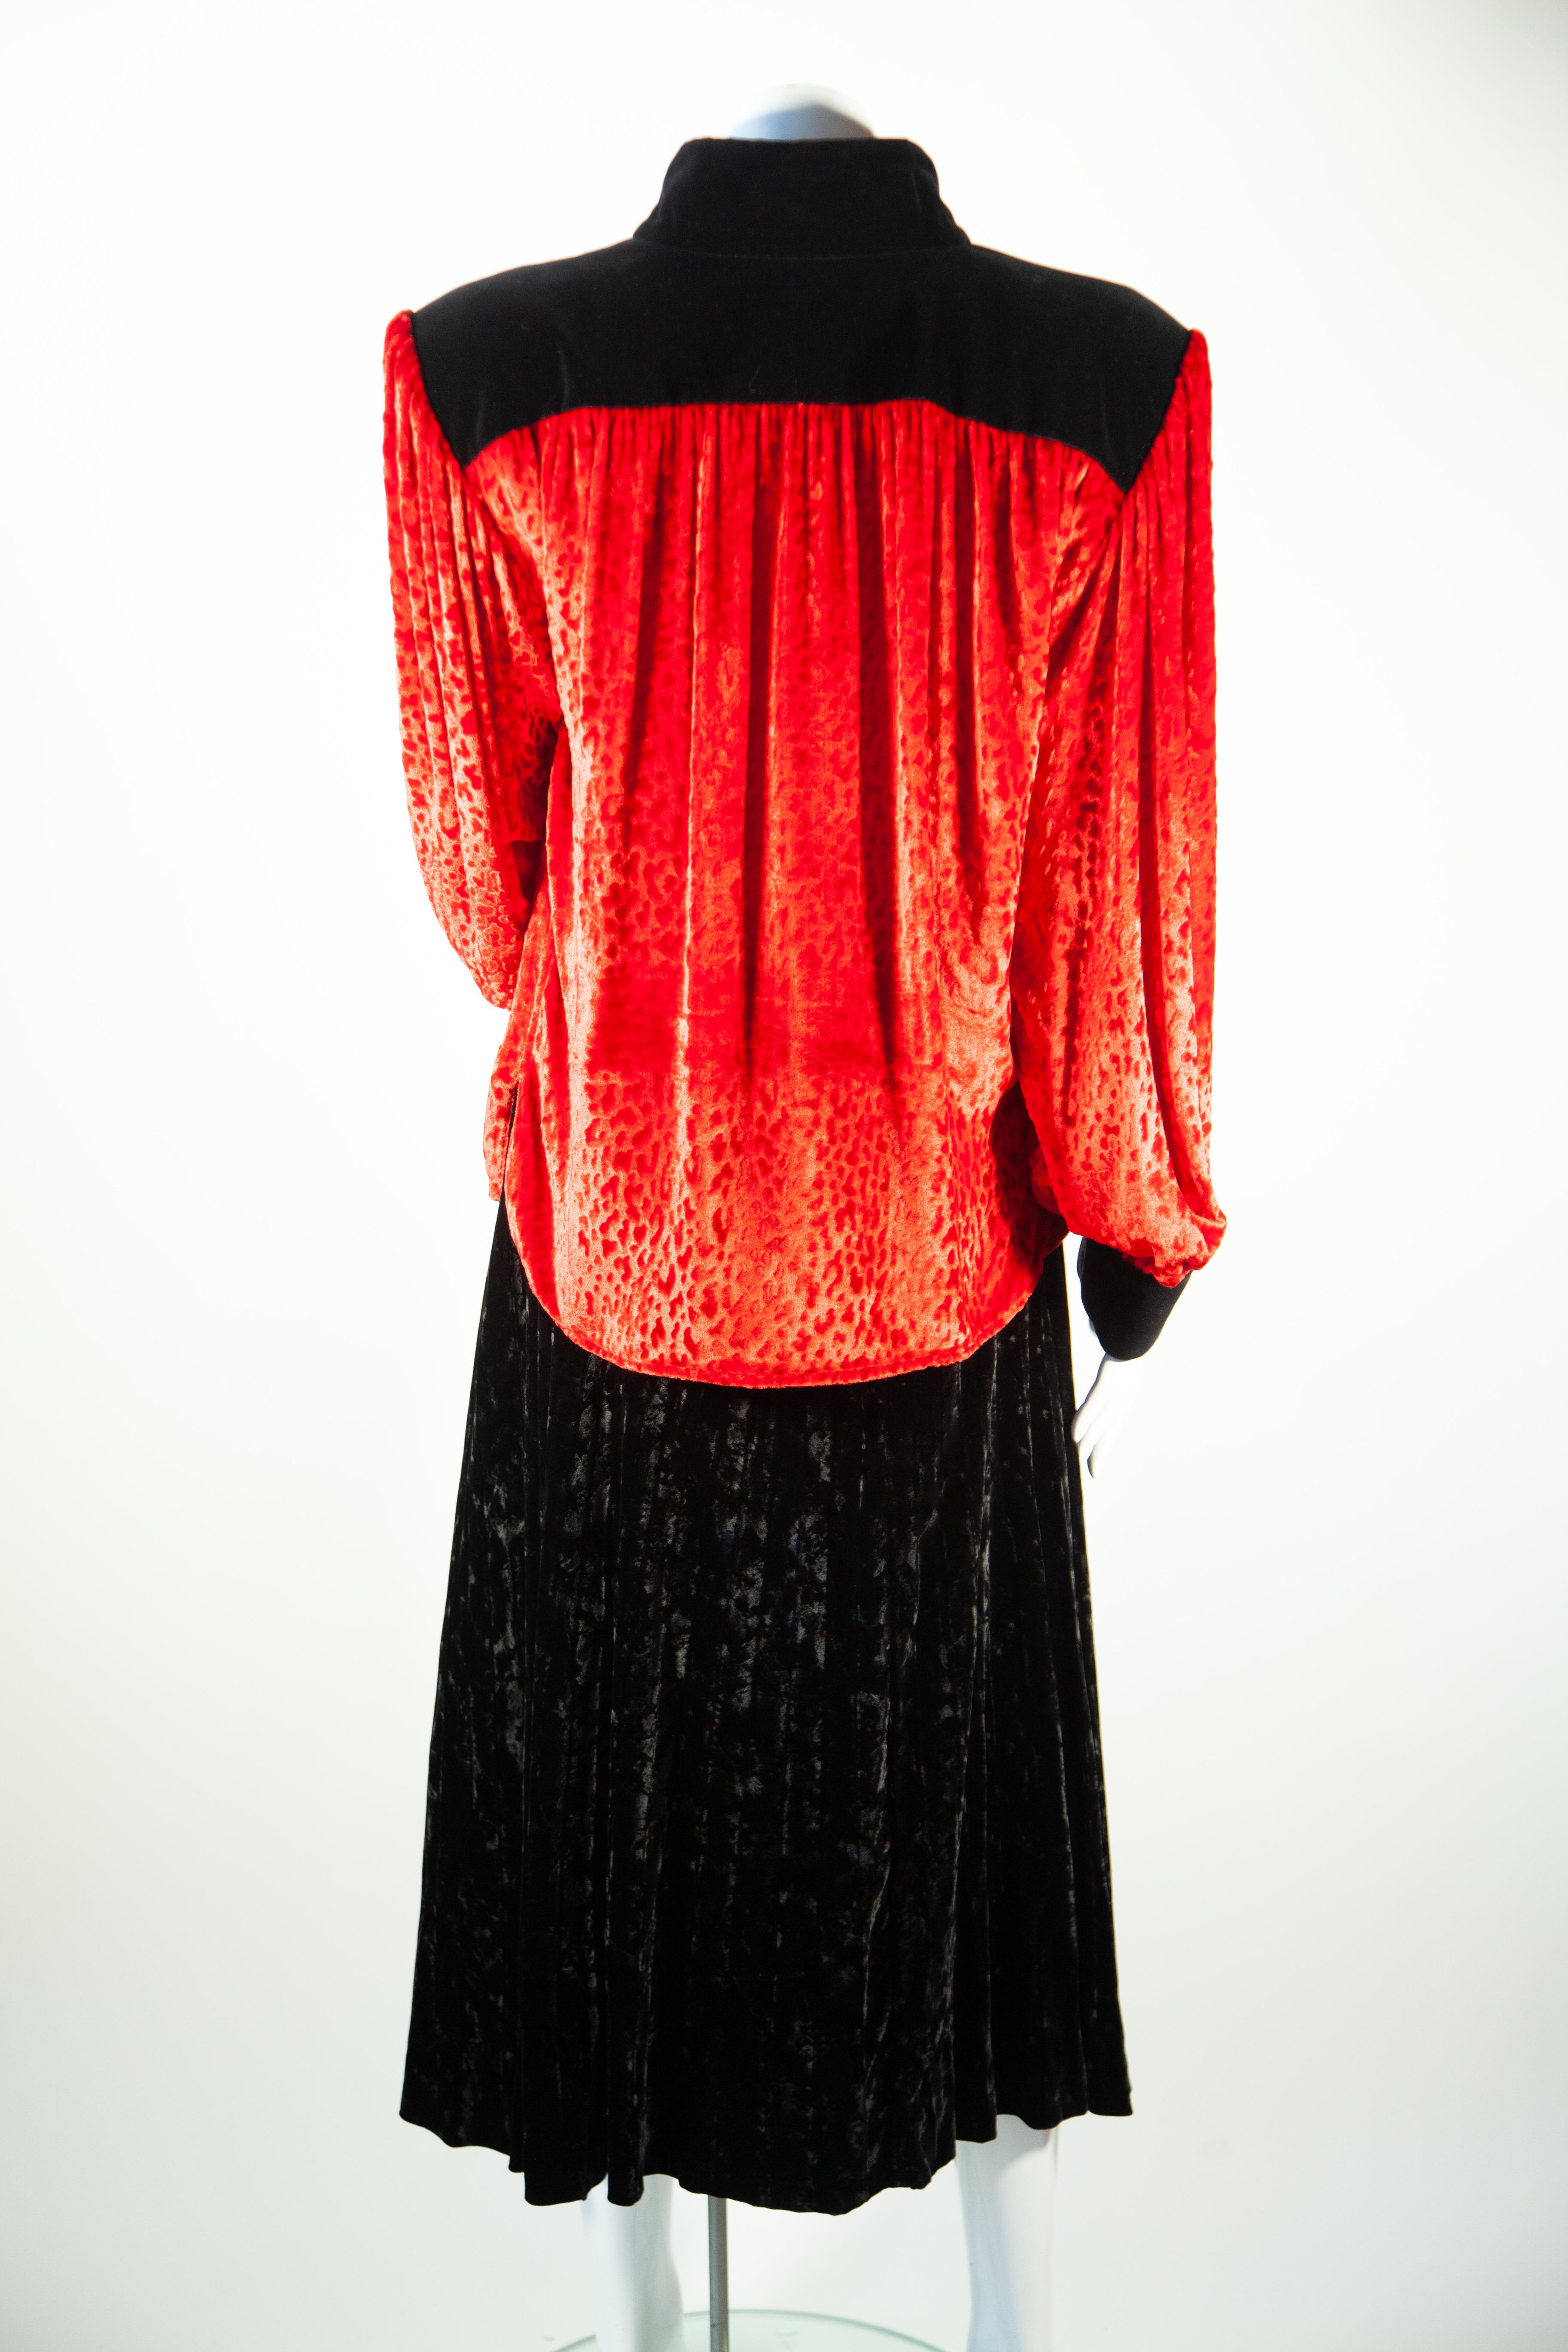 Yves Saint Laurent Rive Gauche Red Velvet Top with Tassels In Excellent Condition For Sale In Kingston, NY